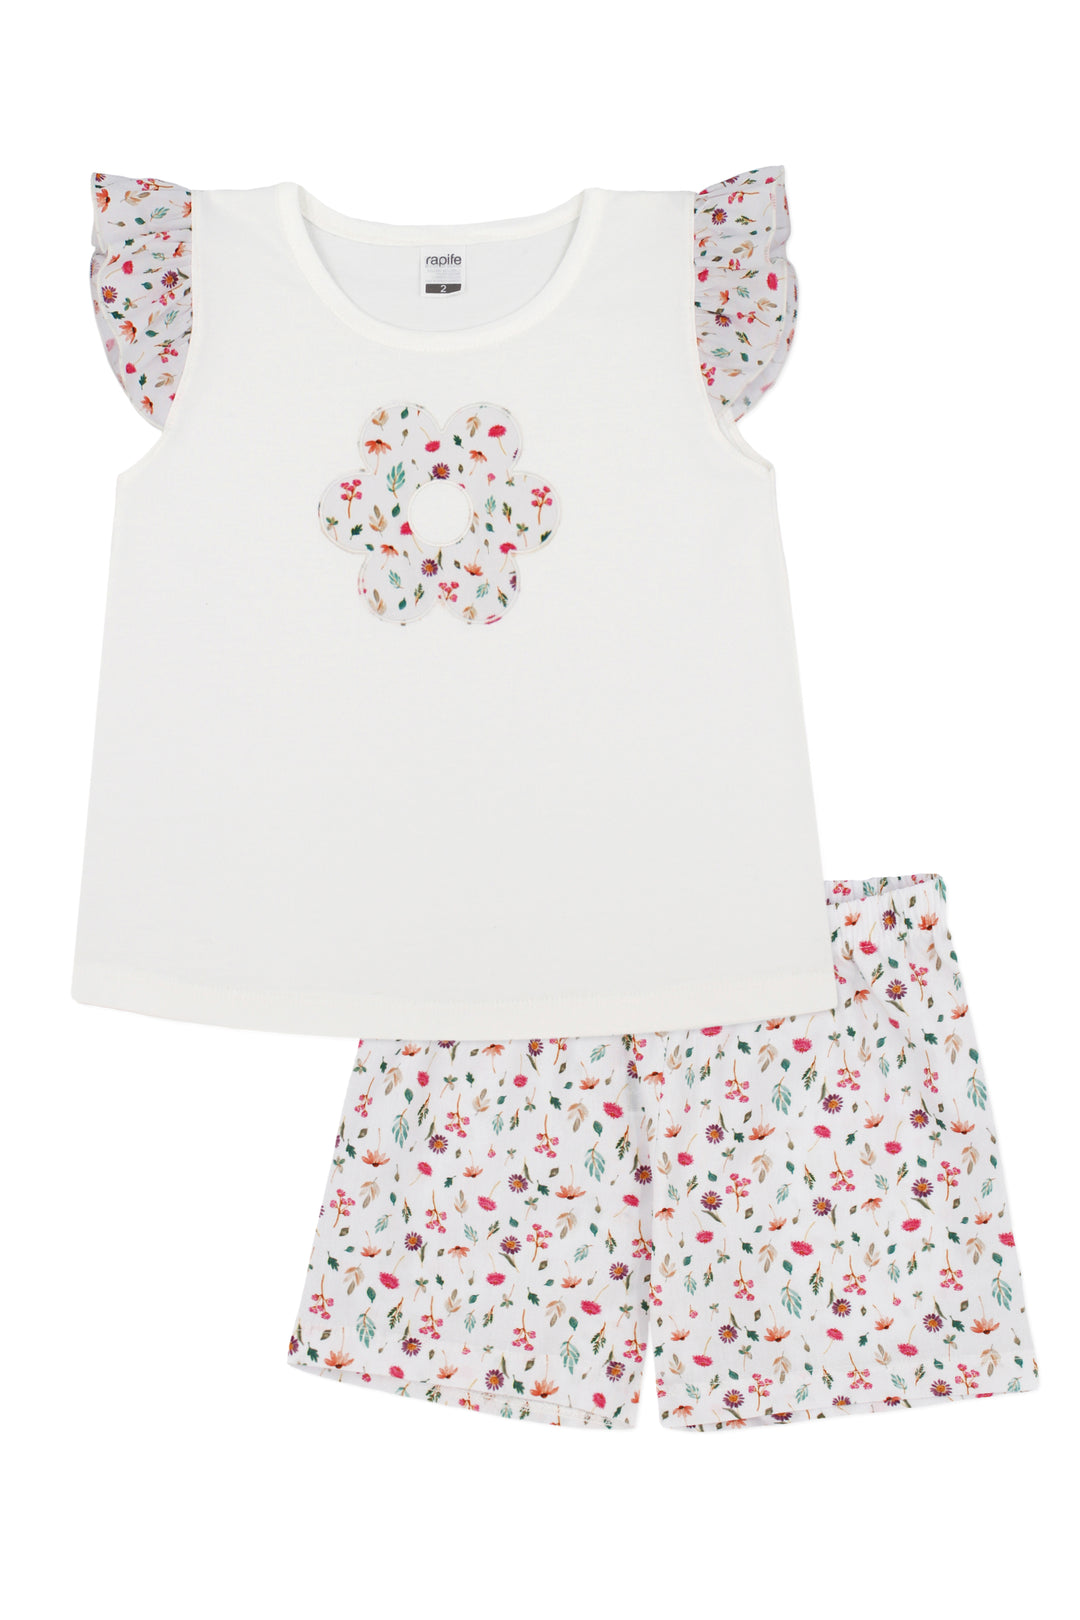 Rapife "Izzy" Multicoloured Floral Blouse & Shorts | Millie and John